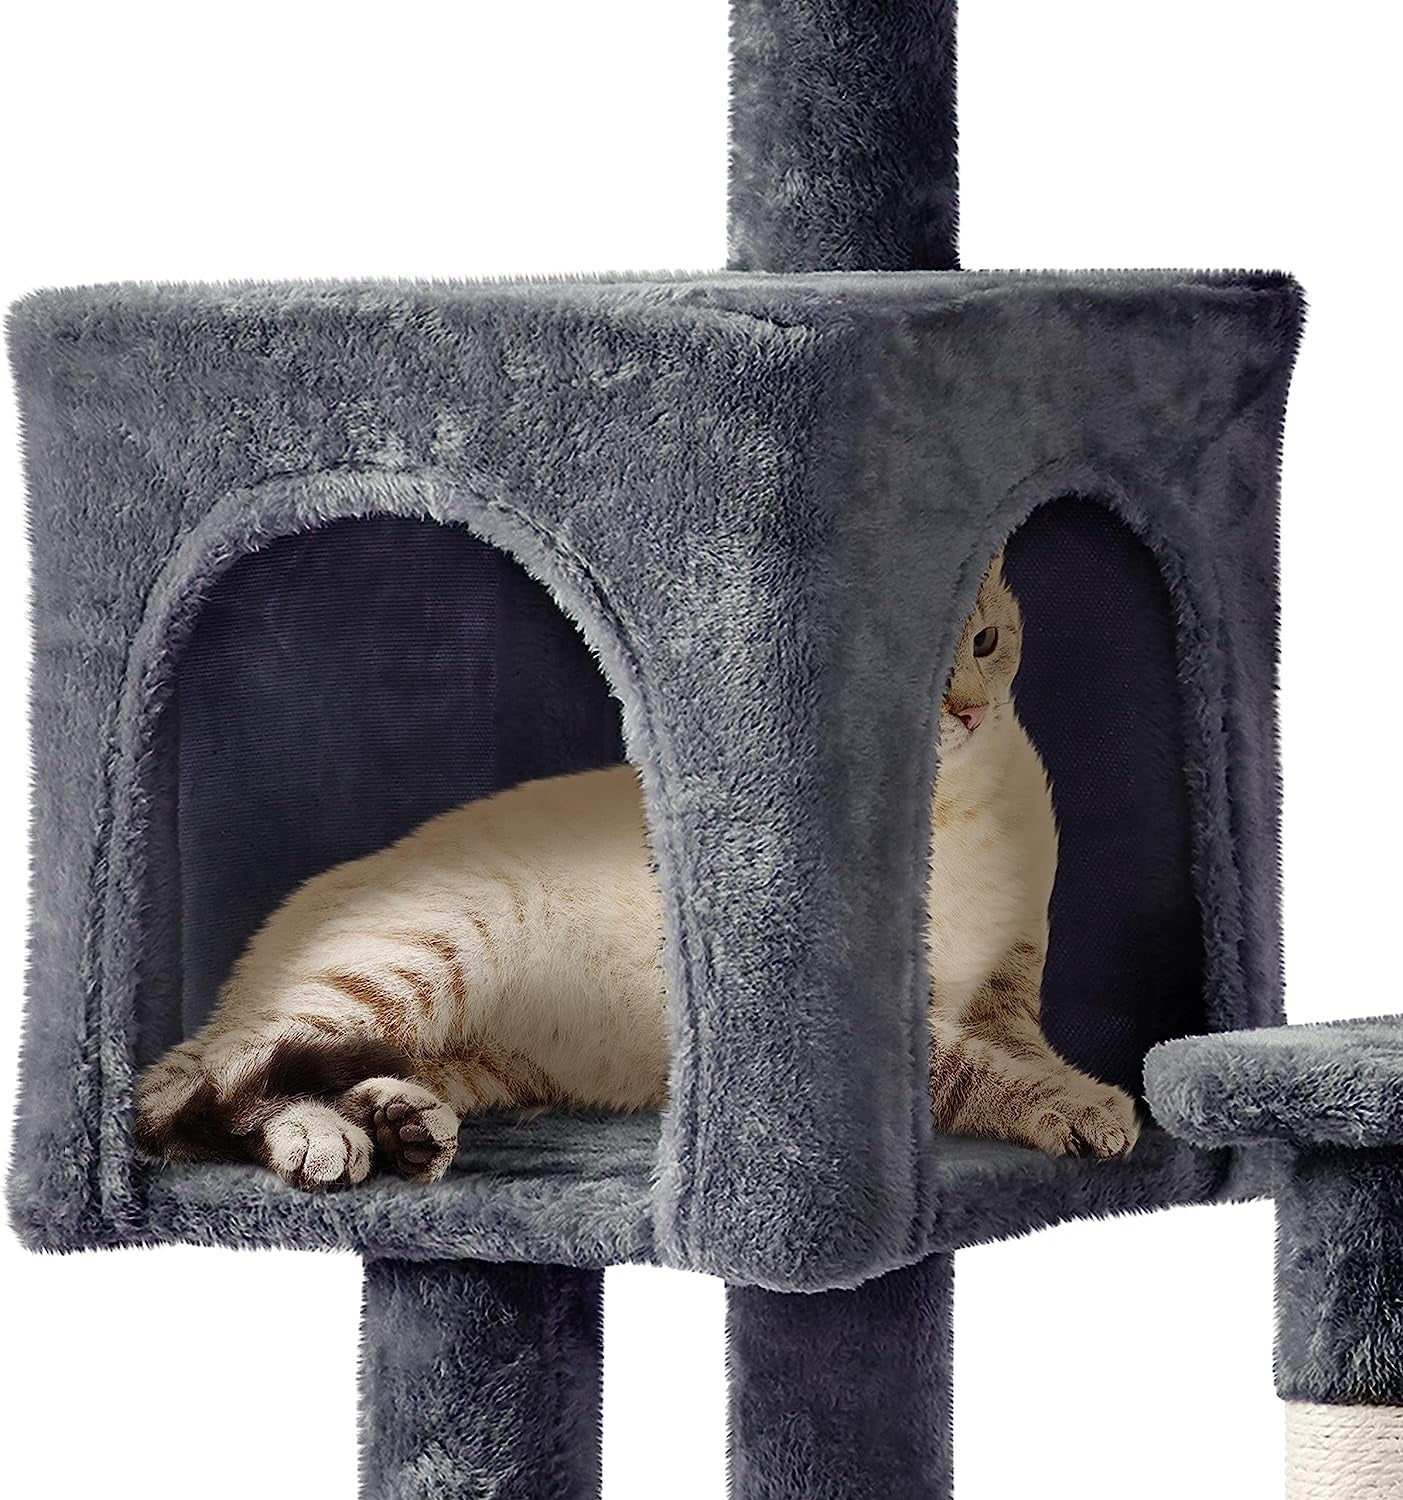 Cat Tree Cat Tower Multilevel Cat Trees for Indoor Cats with Scratching Posts Climbing Hole, Replaceable Dangling Balls Cat Condo for Large Cats and Kittens, 52In